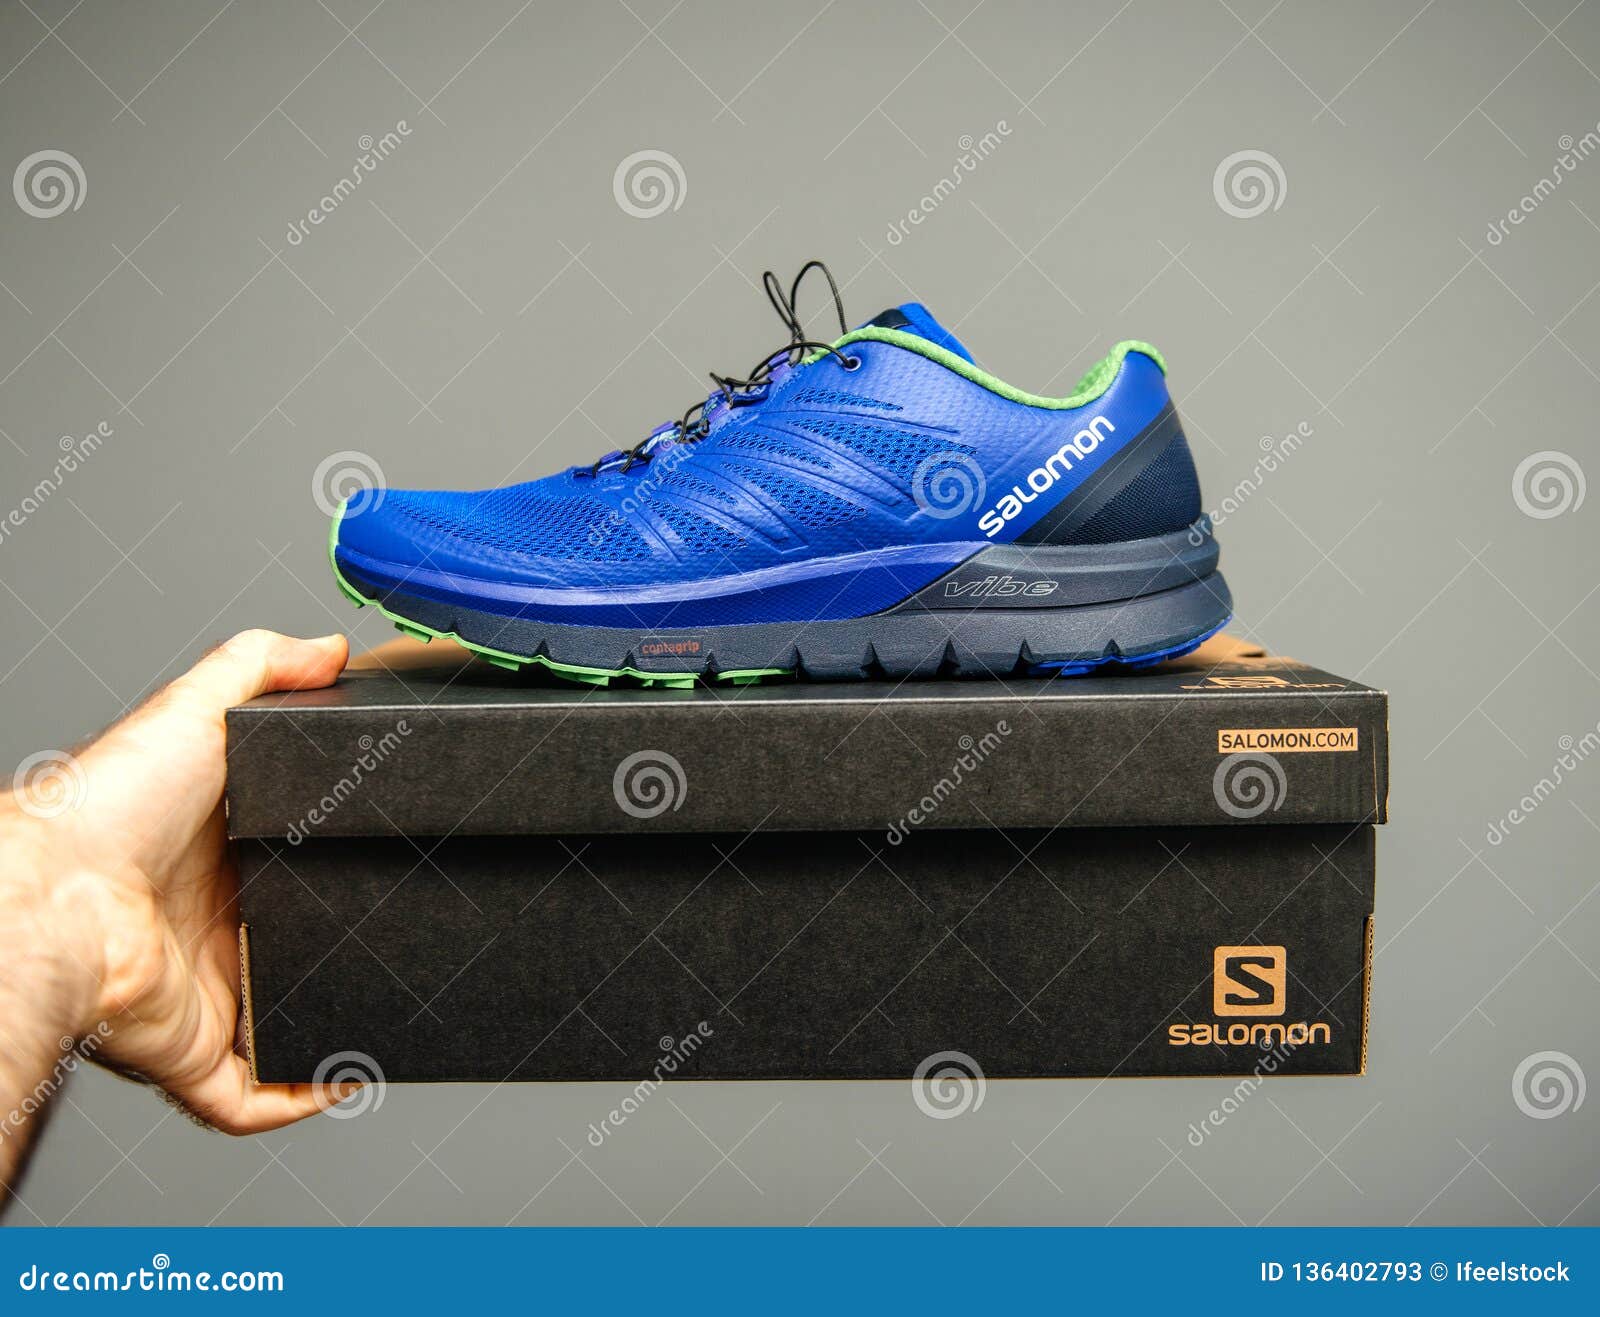 Sense Pro Everyday Running Performance Shoes Editorial Stock Photo - Image of competition, female: